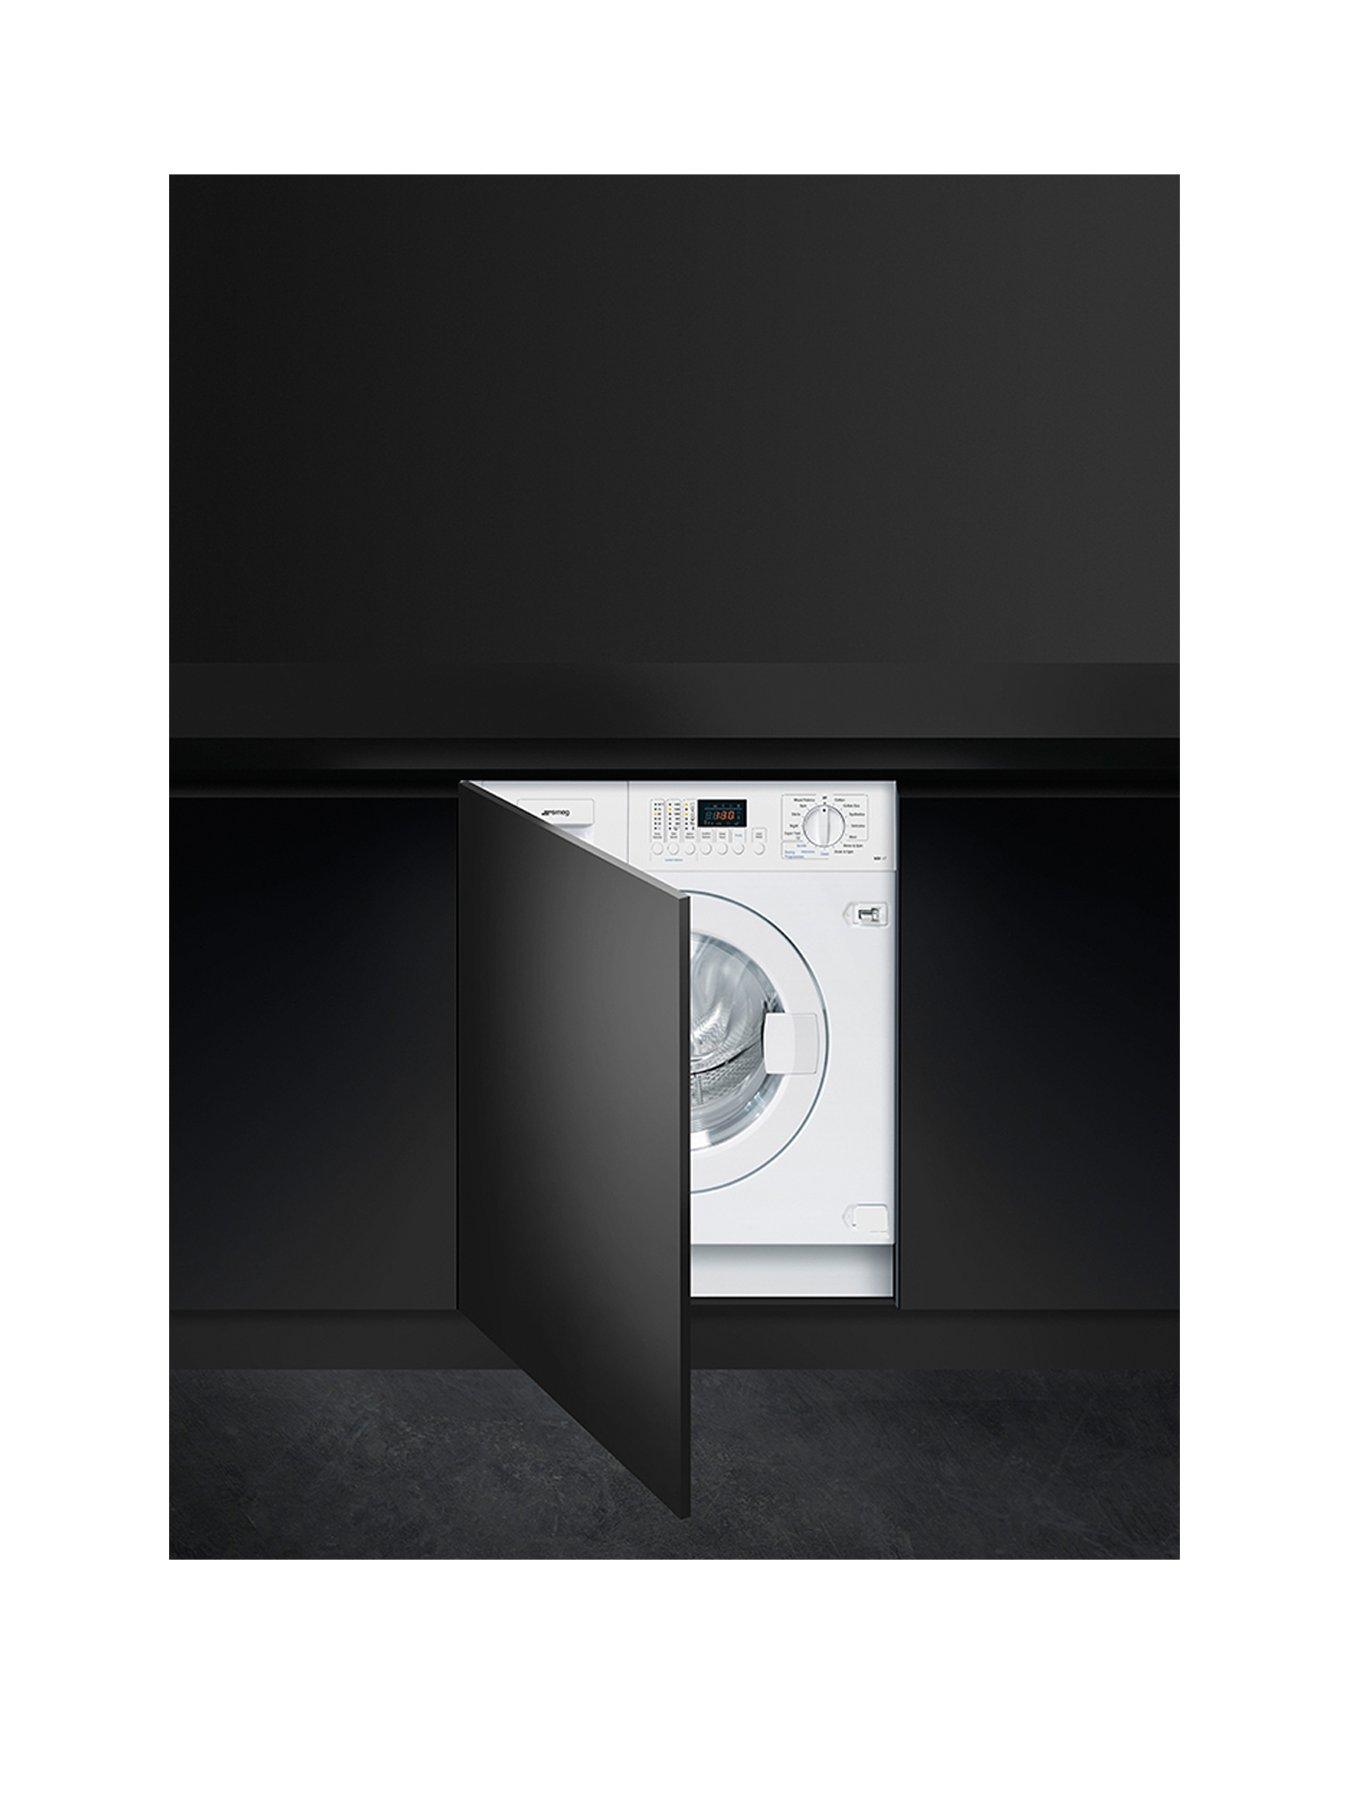 Smeg Wdi147 Fully Integrated Washer Dryer